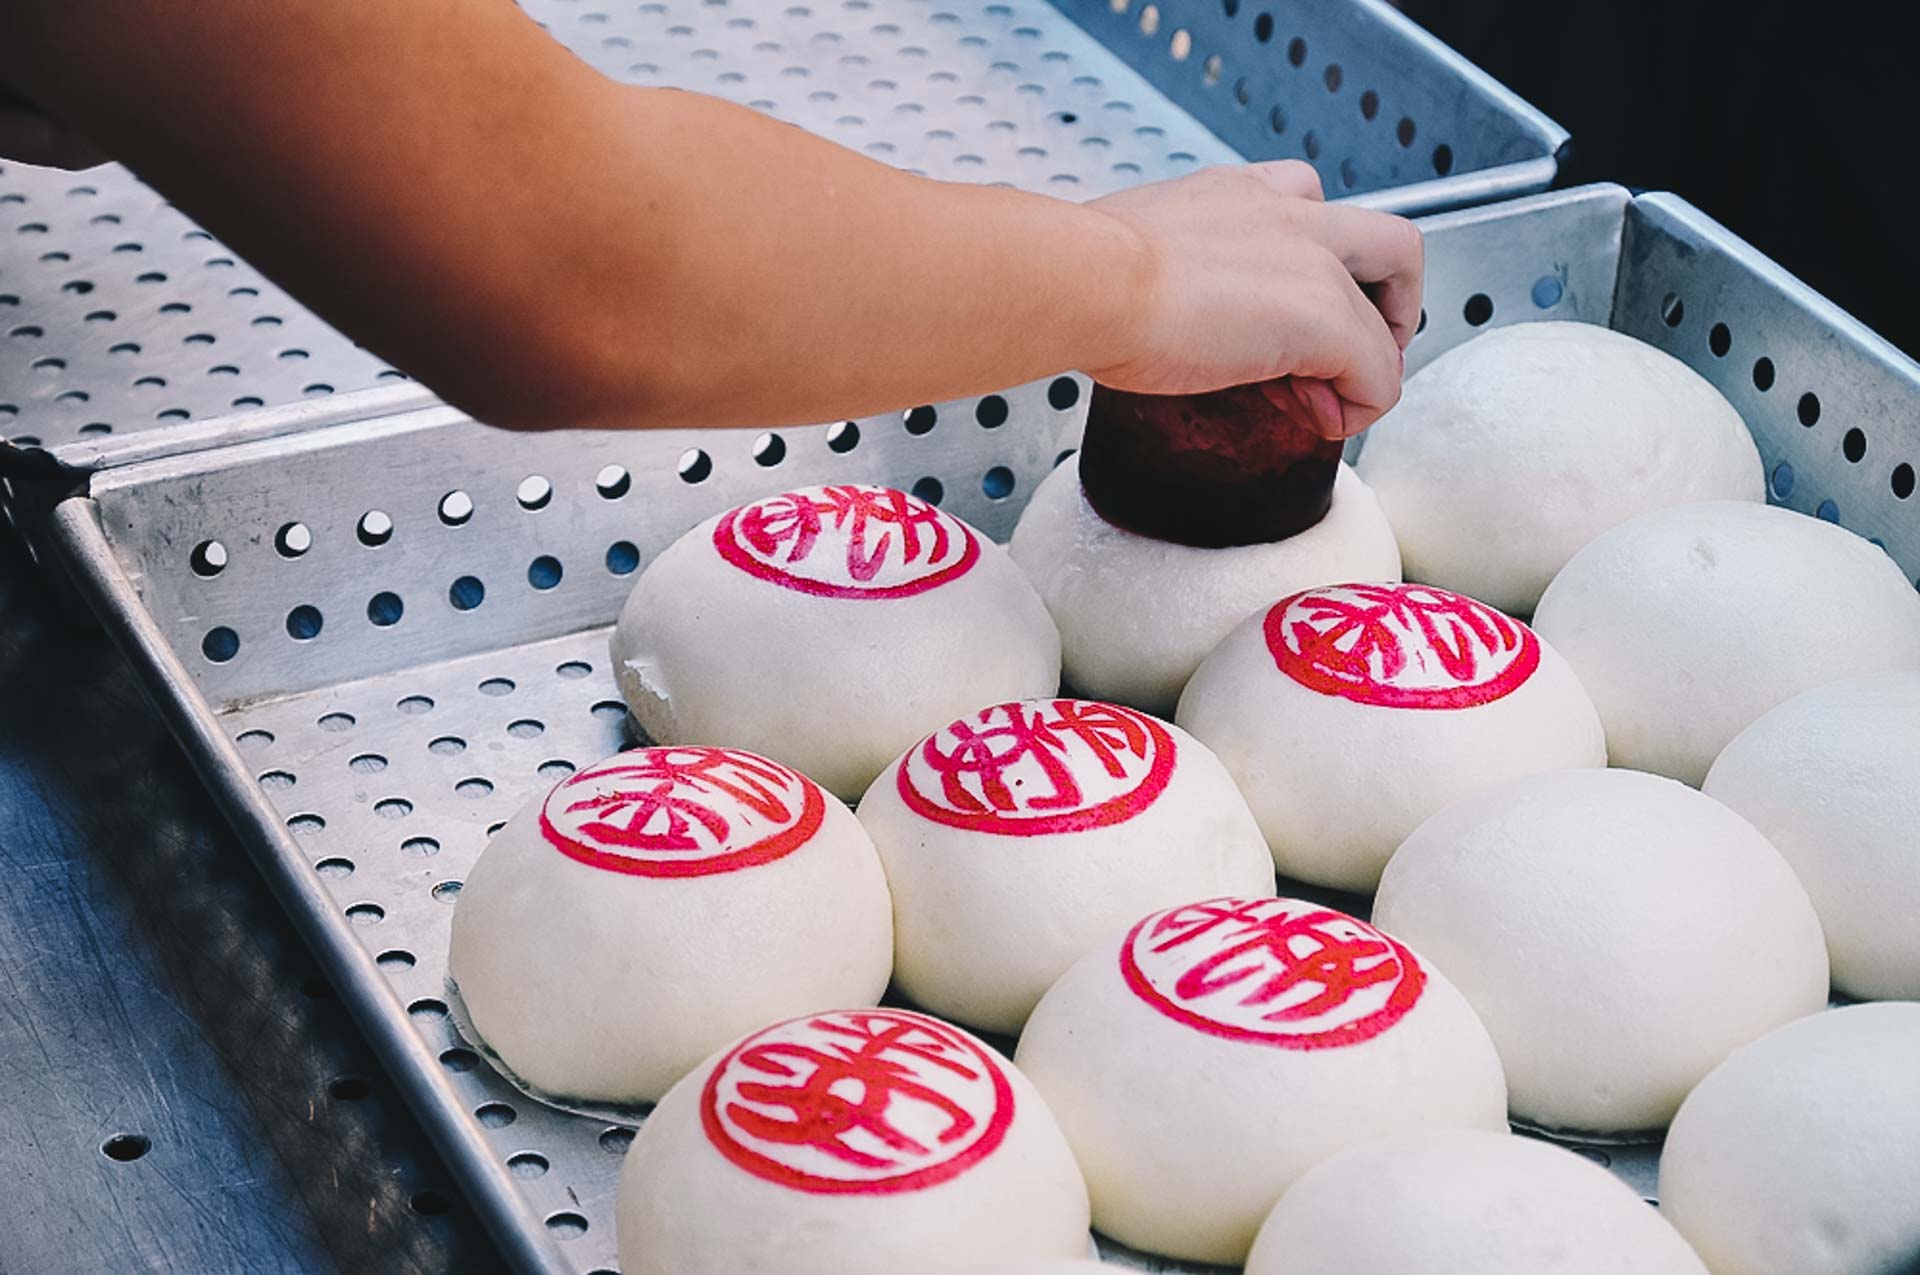 ‘Lucky’ buns from Cheung Chau